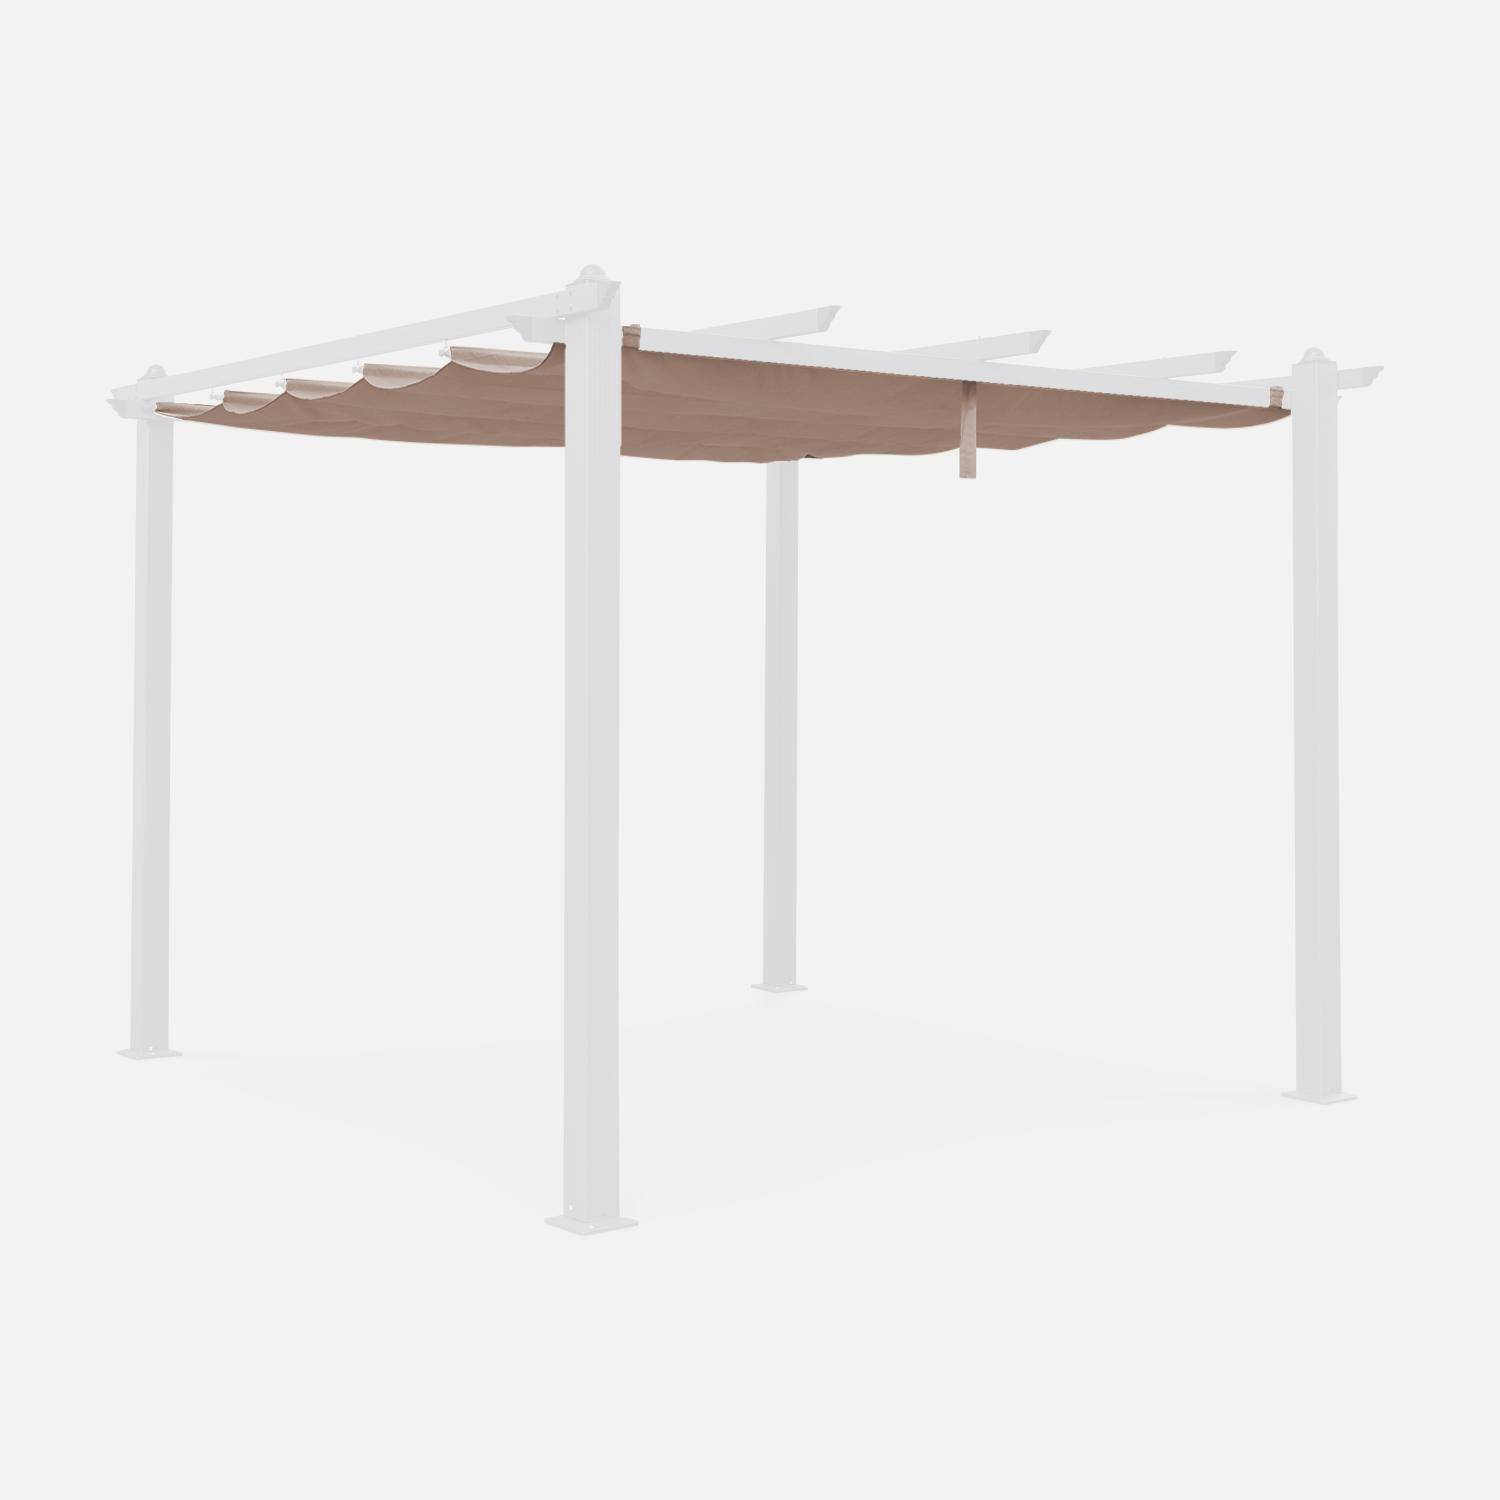 Canopy roof for 3x3m Condate gazebo - pergola replacement canopy - Beige-brown,sweeek,Photo1